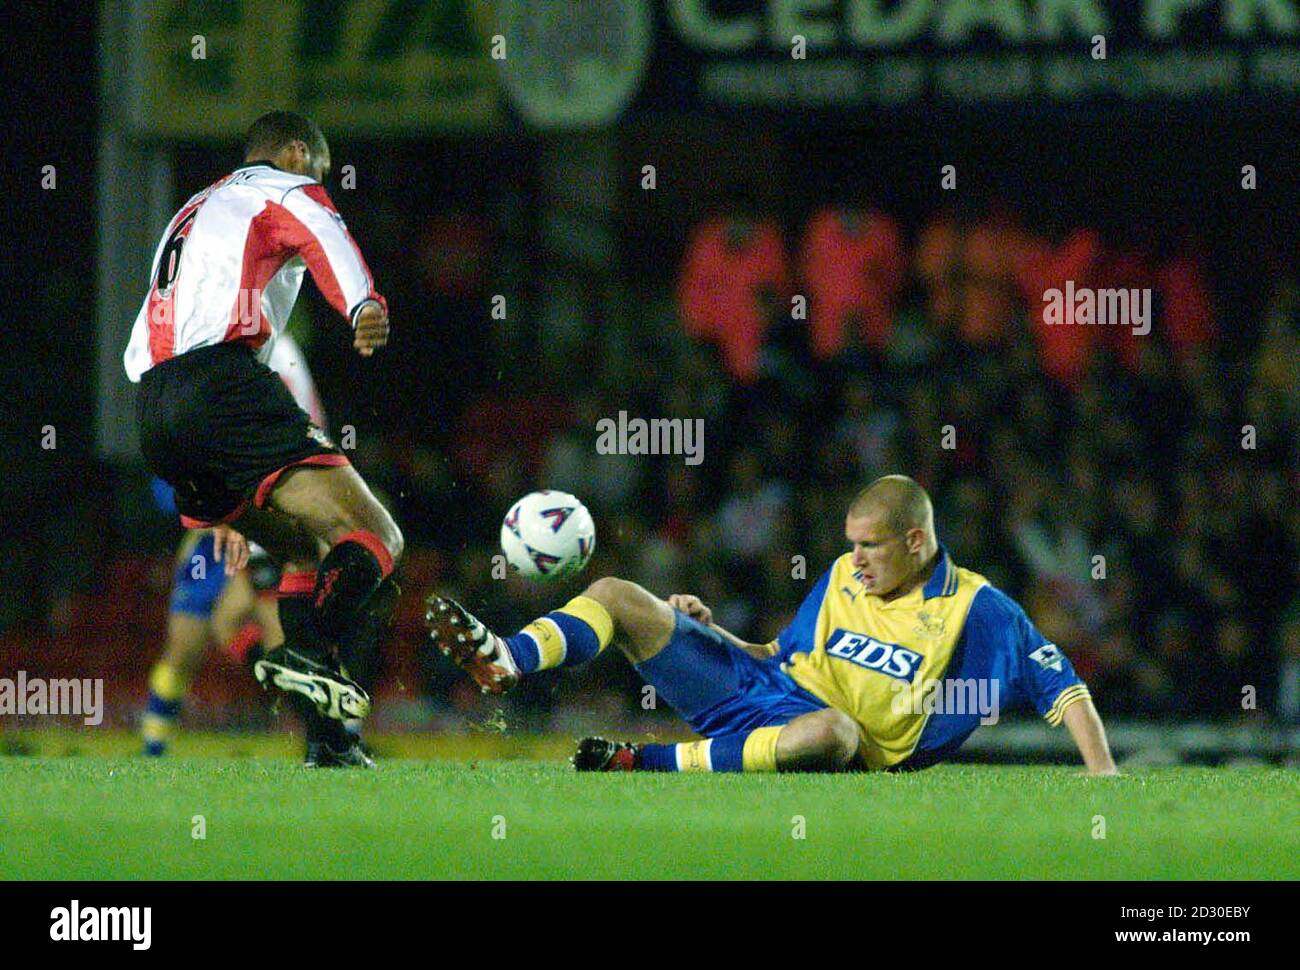 This picture may only be used within the context of an editorial feature. Southampton's Dean Richards (L) manages to stay upright as Derby County's Seth Johnson slides in for a tackle, during their FA Premiership football match at the Dell, Southampton. Stock Photo